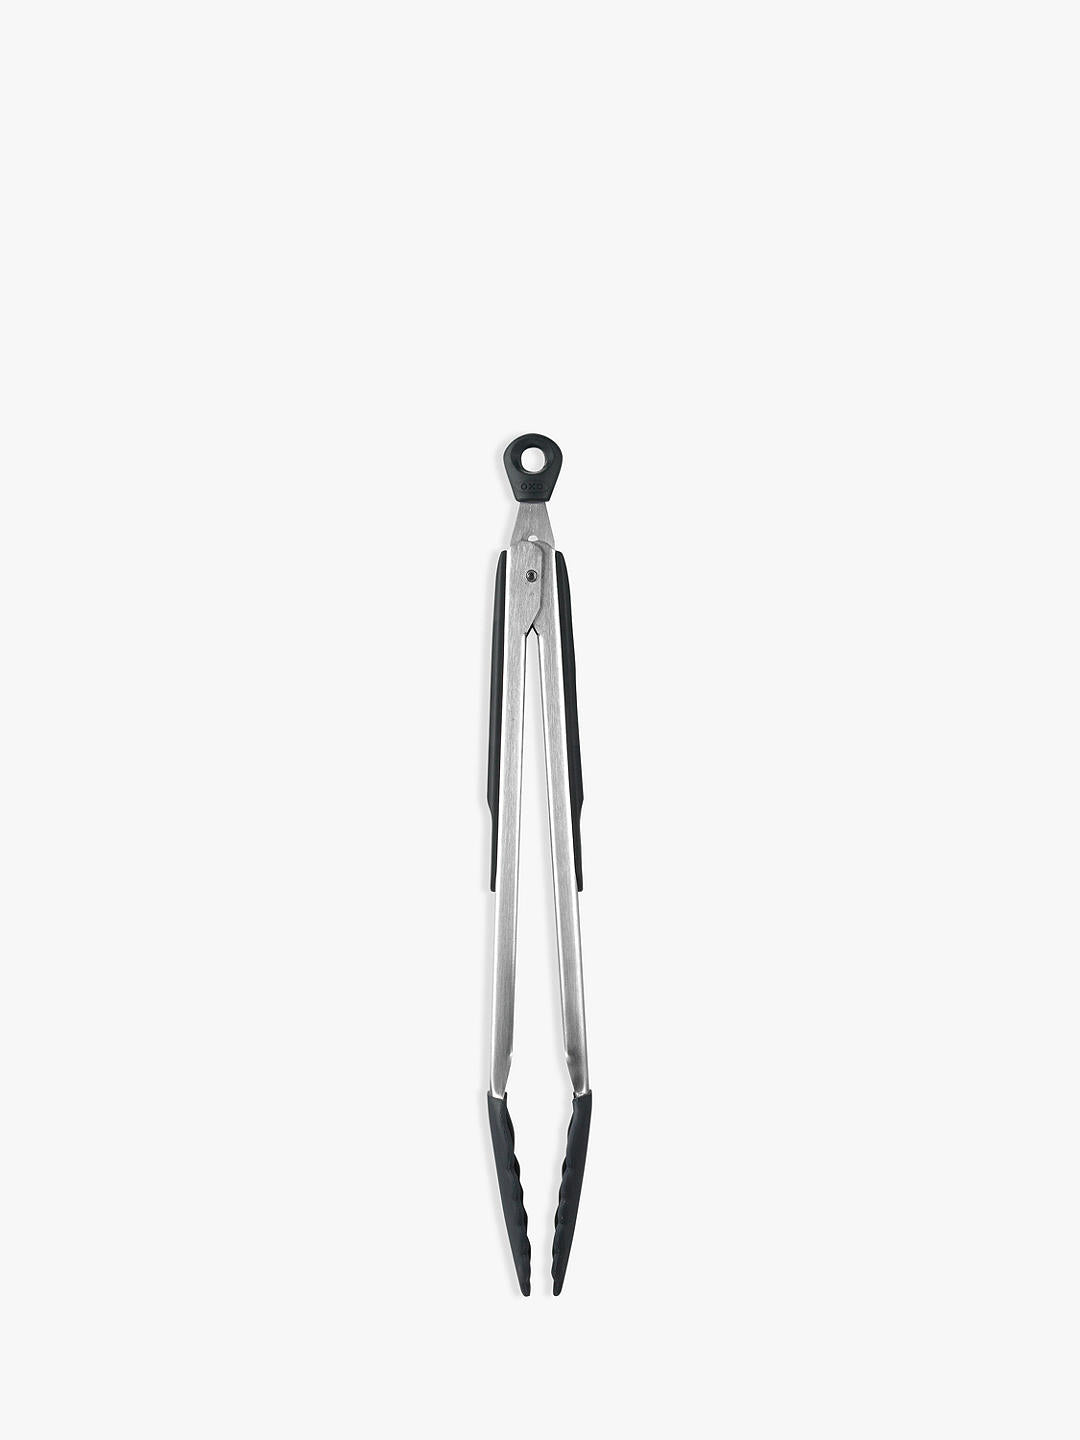 Oxo Good grips - 12" Locking Tongs with Silicone